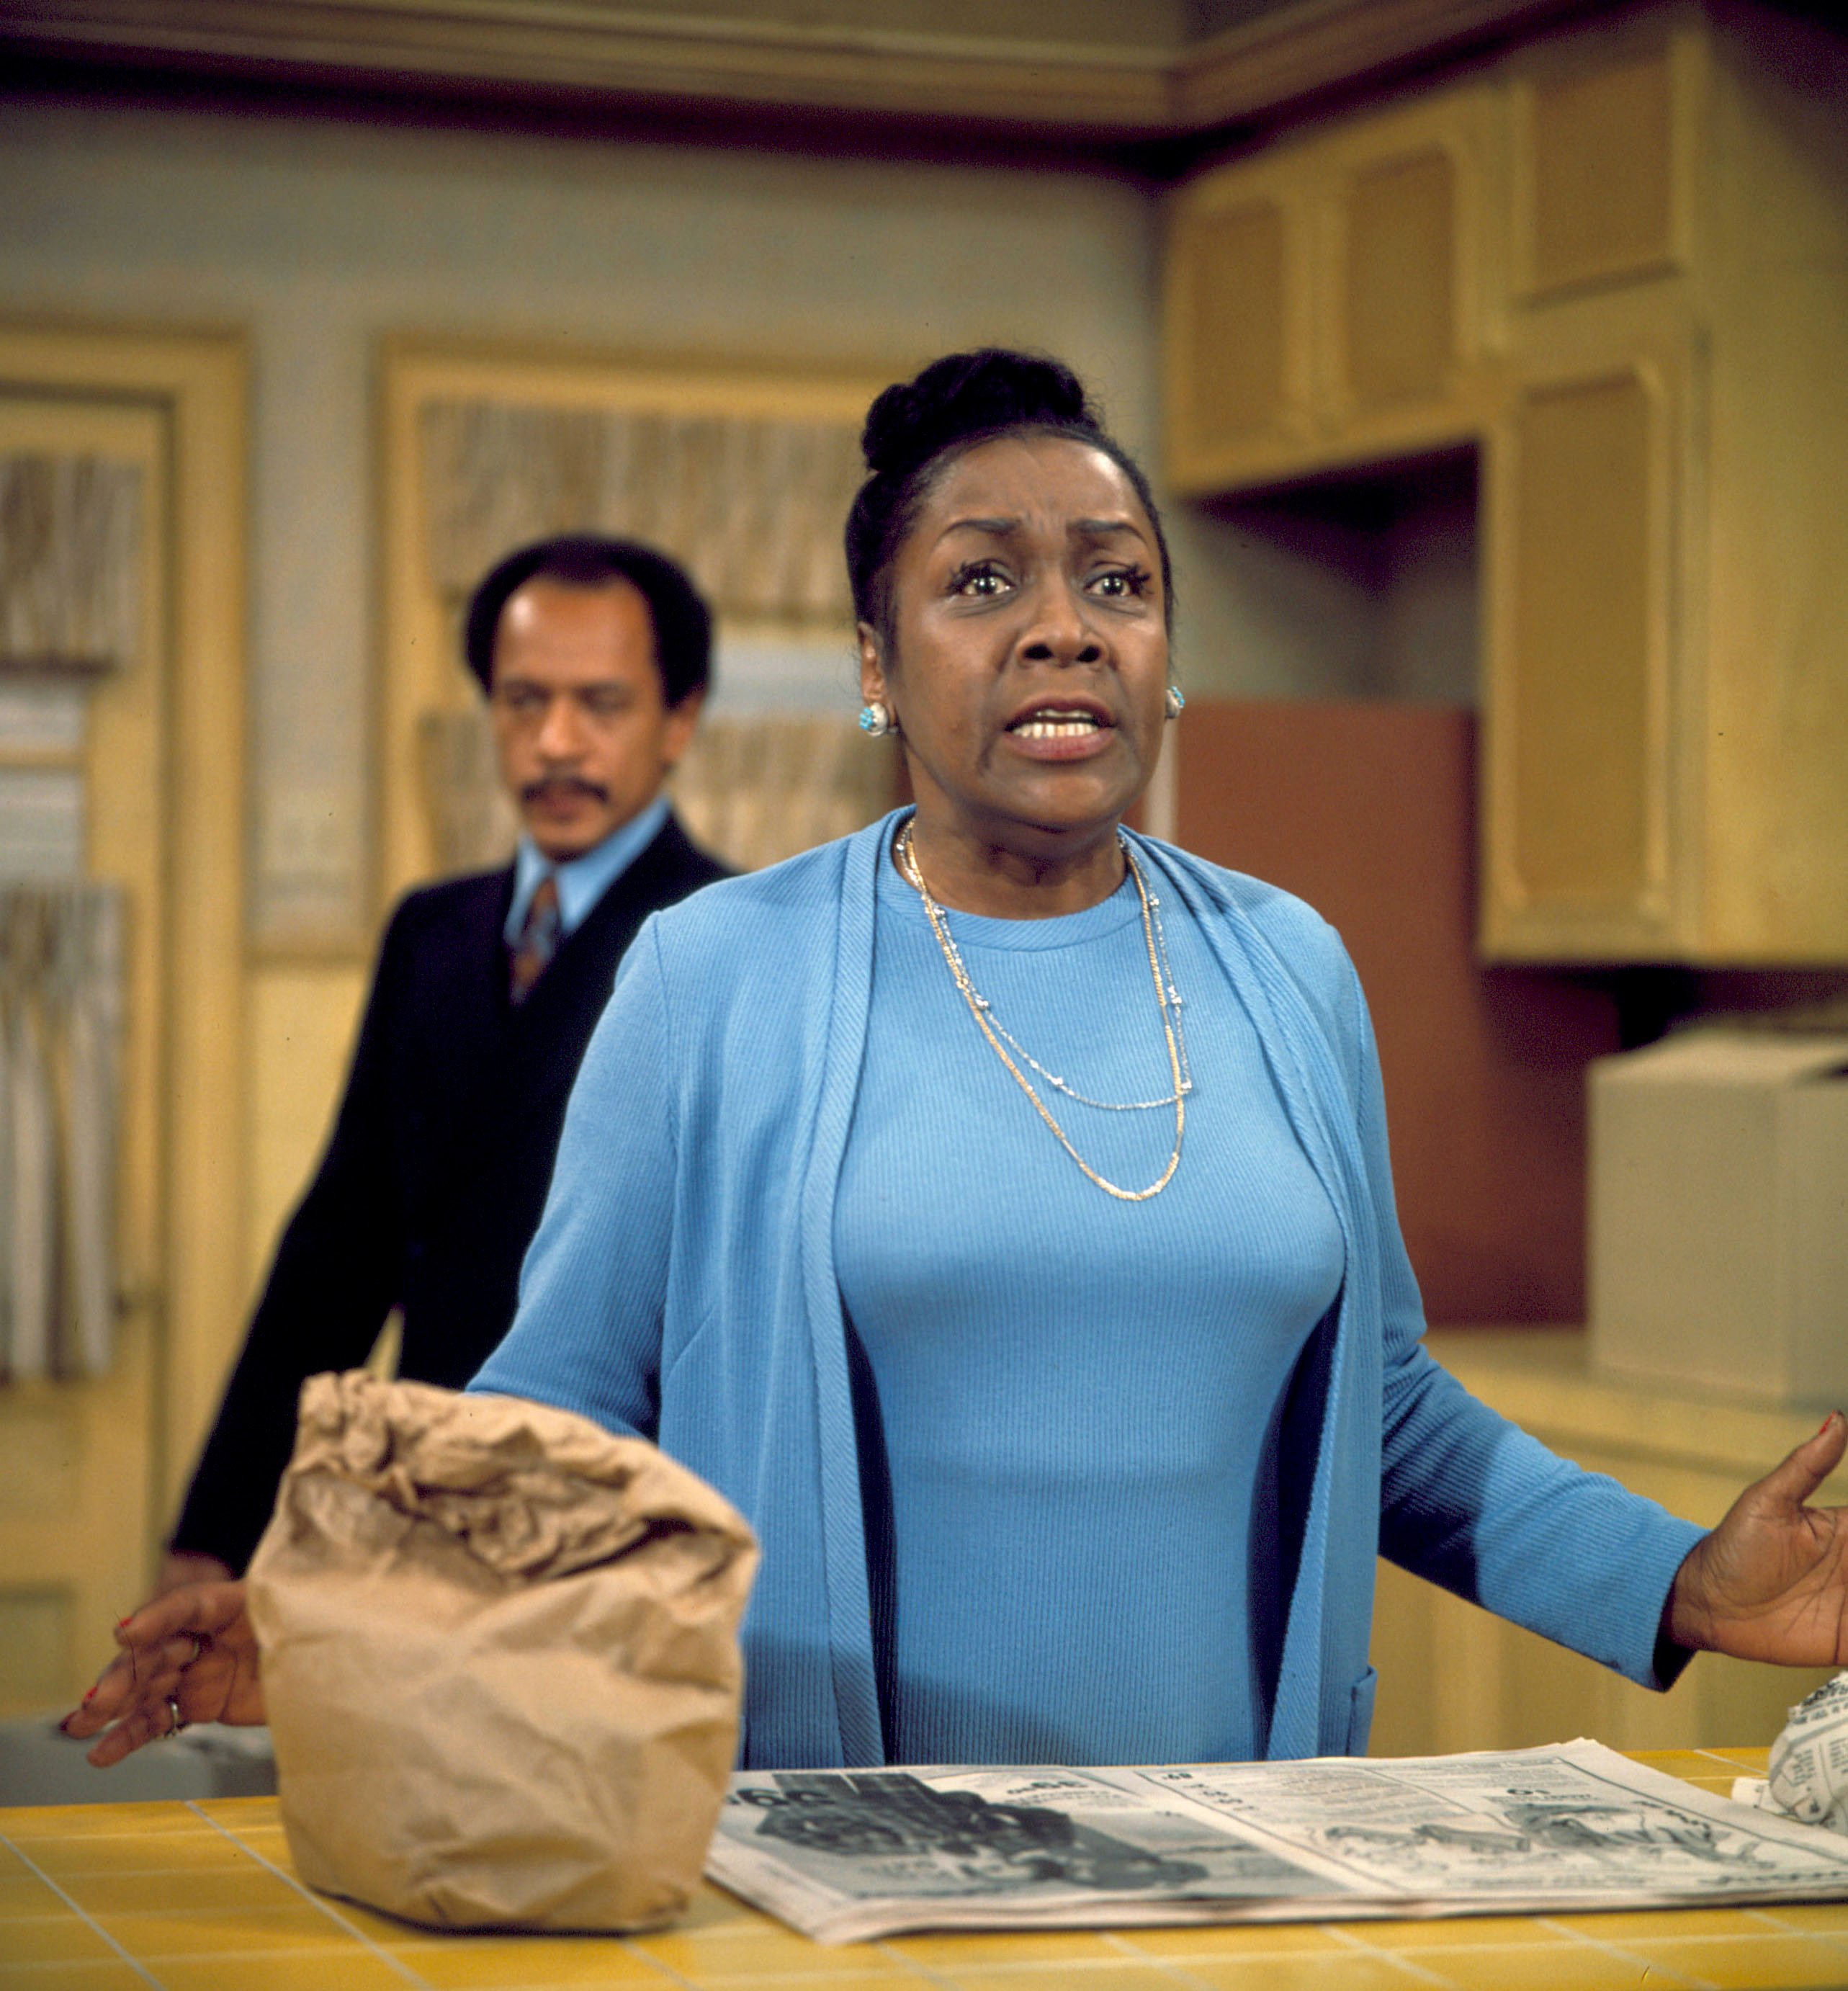 Isabel Sanford (as Louise Jefferson) and Sherman Hemsley (as George Jefferson) in a scene from The Jeffersons